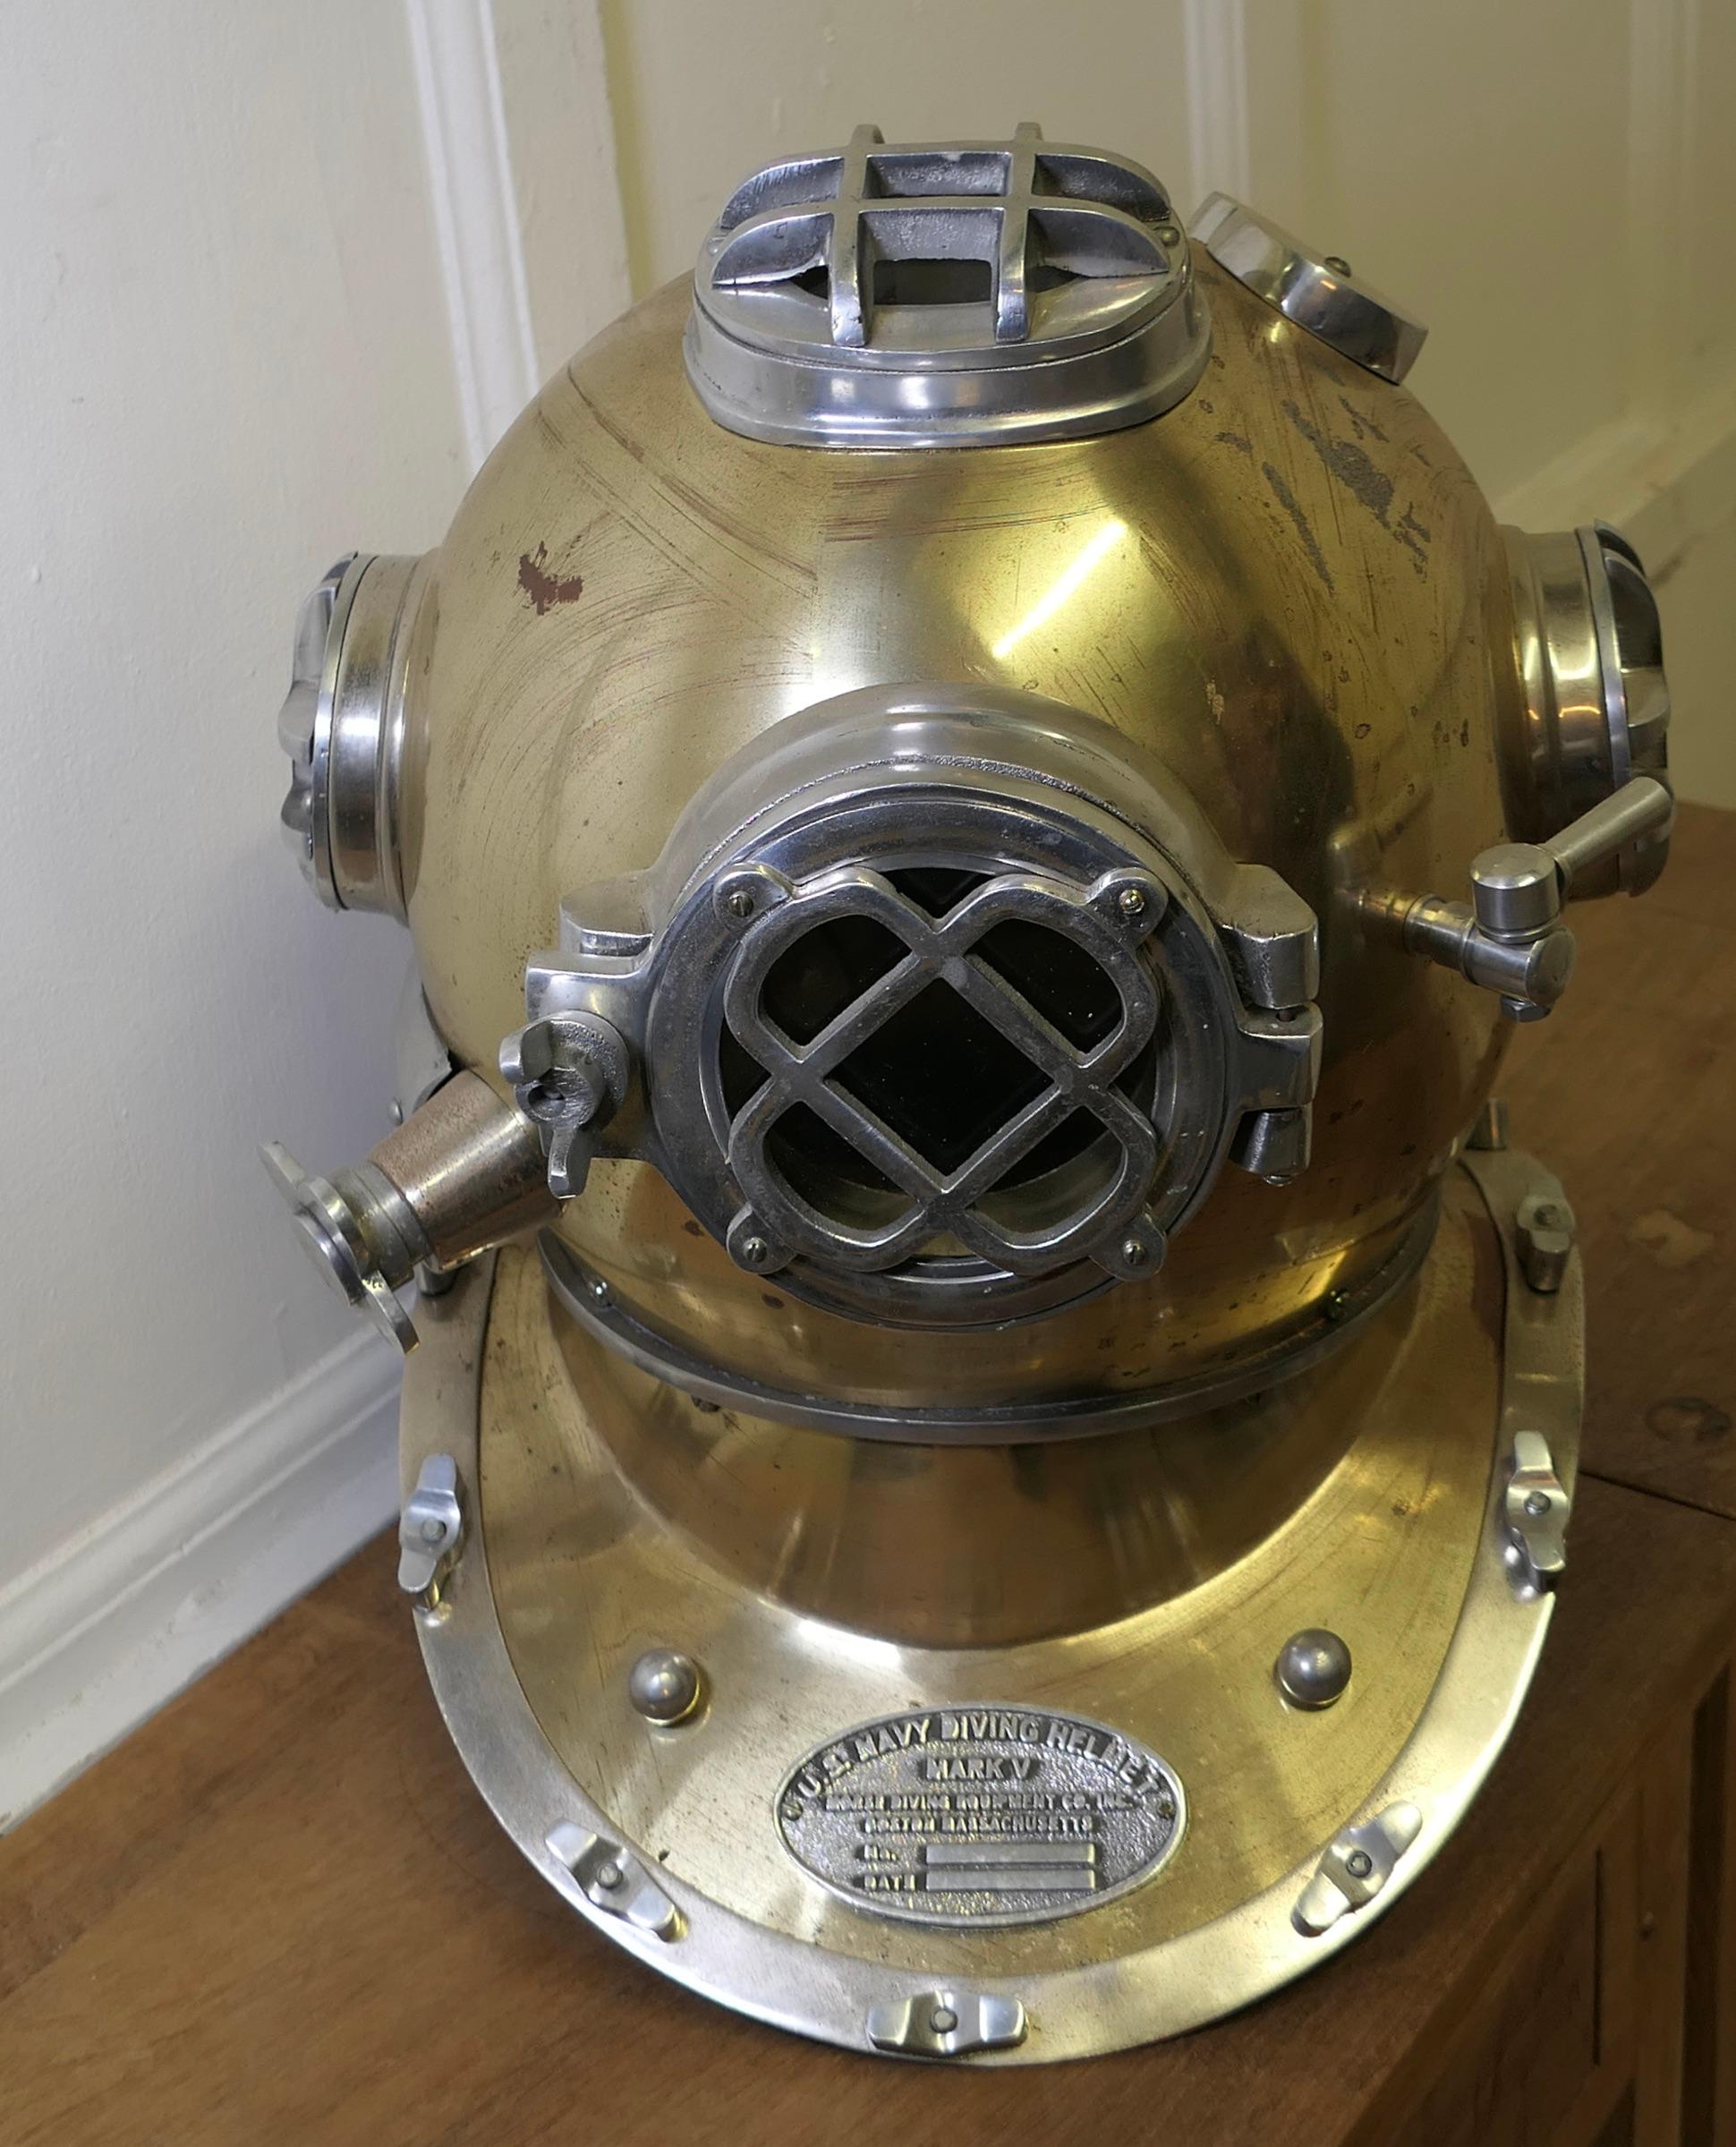 U S Navy Mark V Diving Helmet Military Prototype 

The Helmet is a replica model of US Navy equipment, the helmet is a full size piece made in chrome brass and set on a shoulder stand
In sound condition and a dramatic looking piece 
The Helmet is